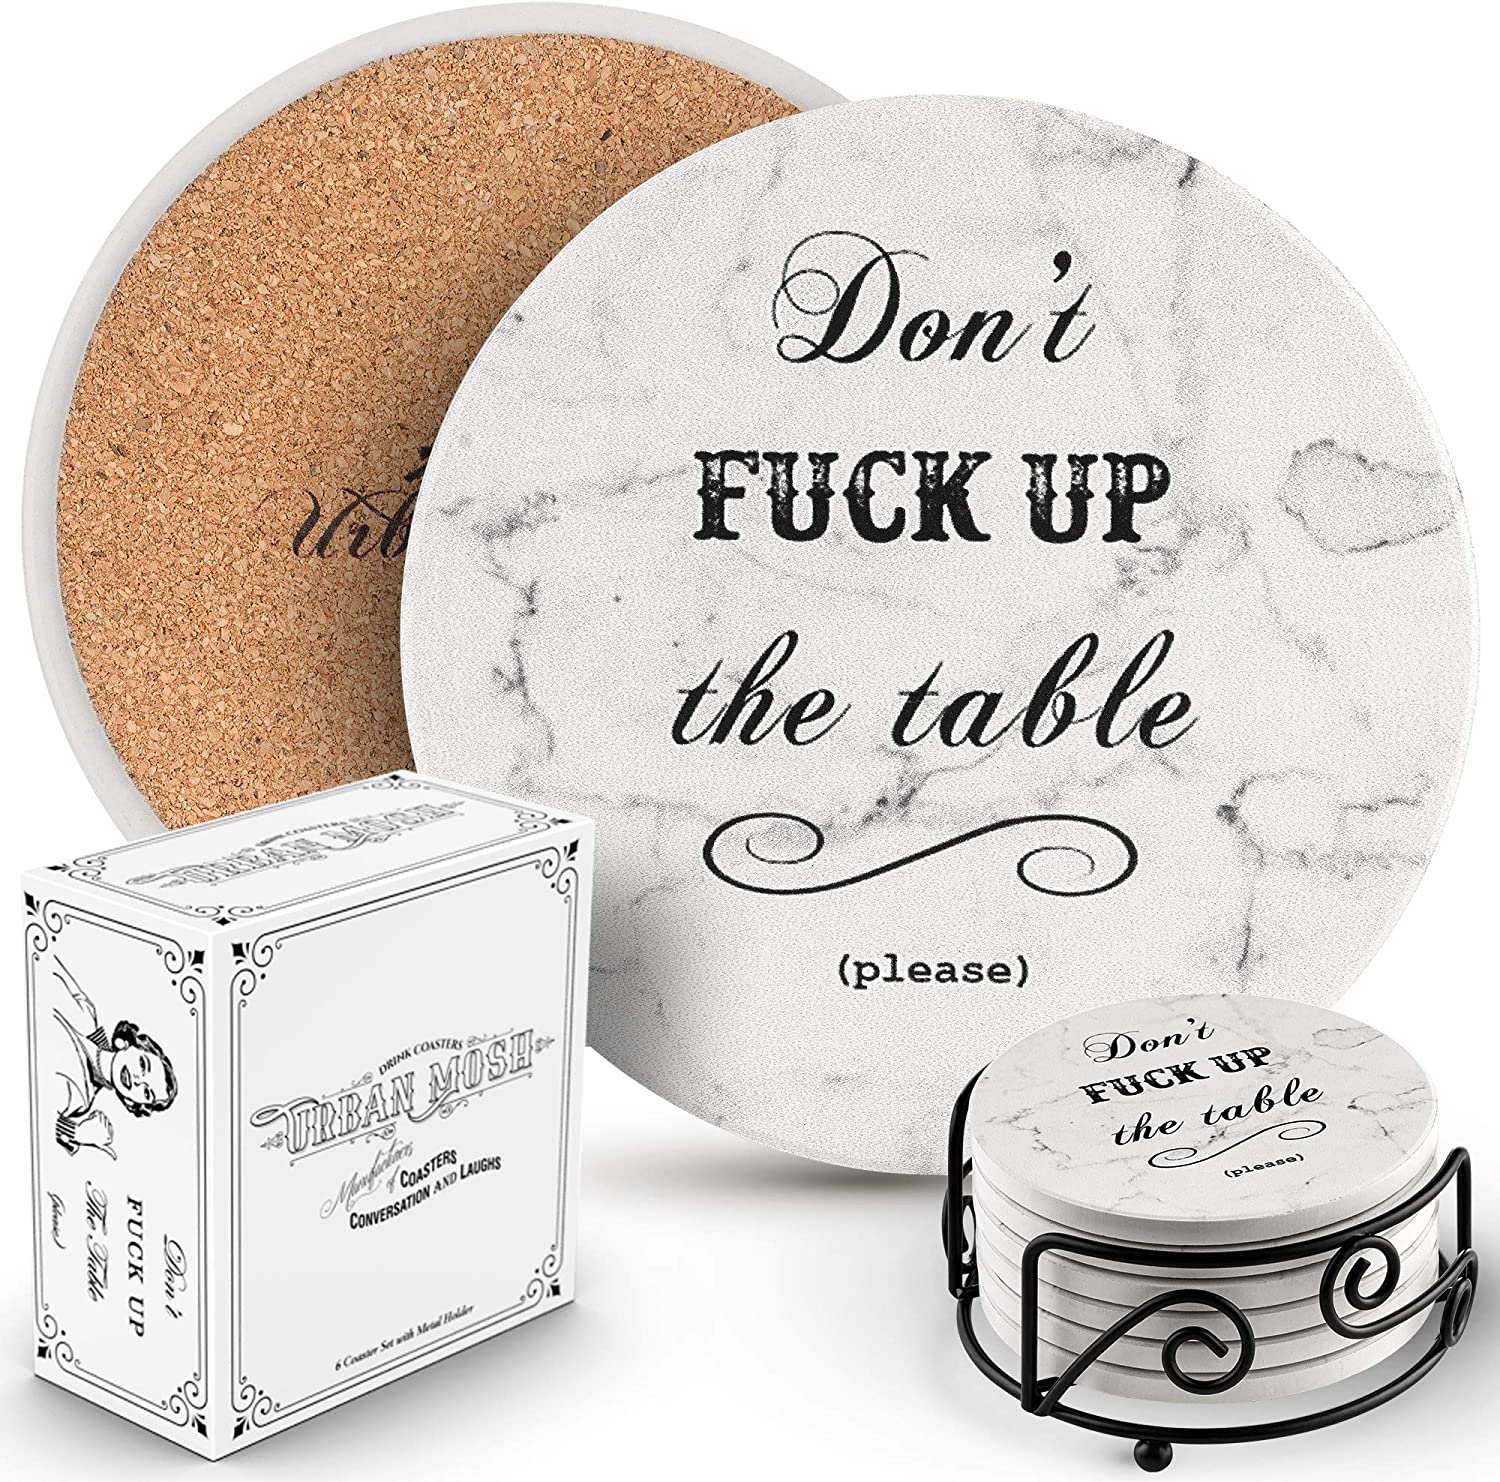 Coasters for Drinks | Absorbent Drink Coaster (6-Piece Set) | Housewarming Hostess Gifts for New Home, Man Cave House Warming Presents Decor, Wedding Registry, Living Room Decorations, Cool Gift Ideas